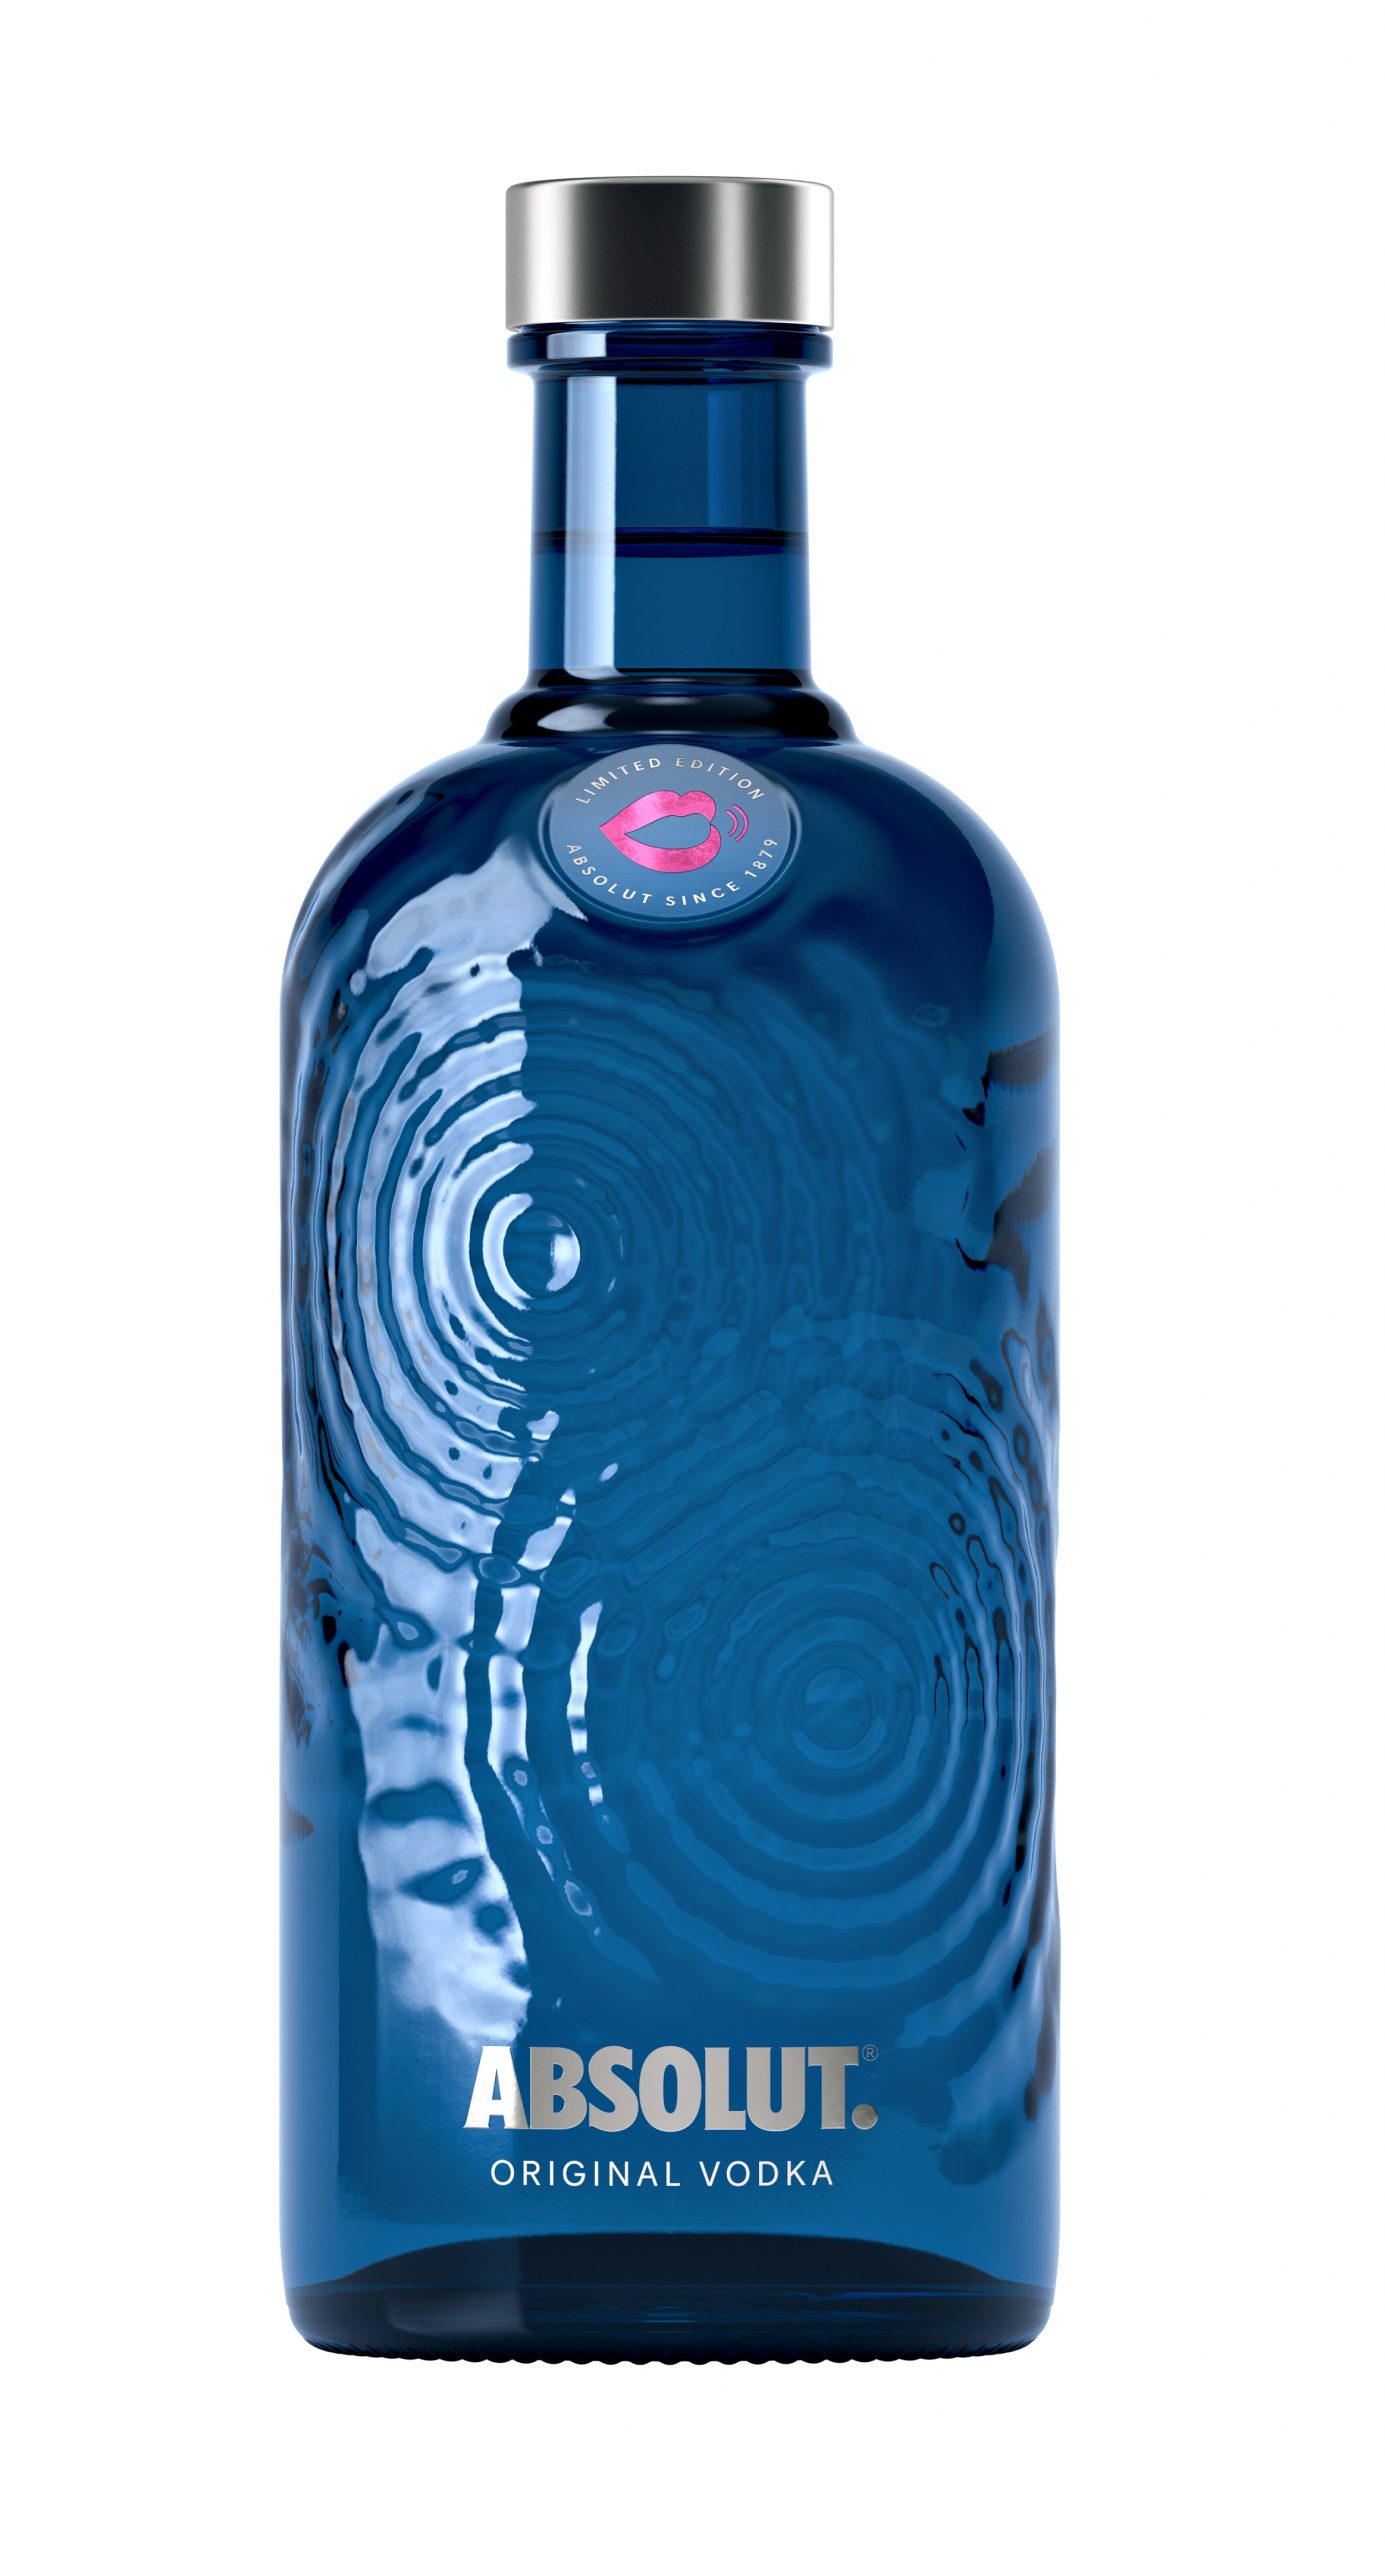 Absolut launches new bottle inspiring “wavemakers” to get their voices heard